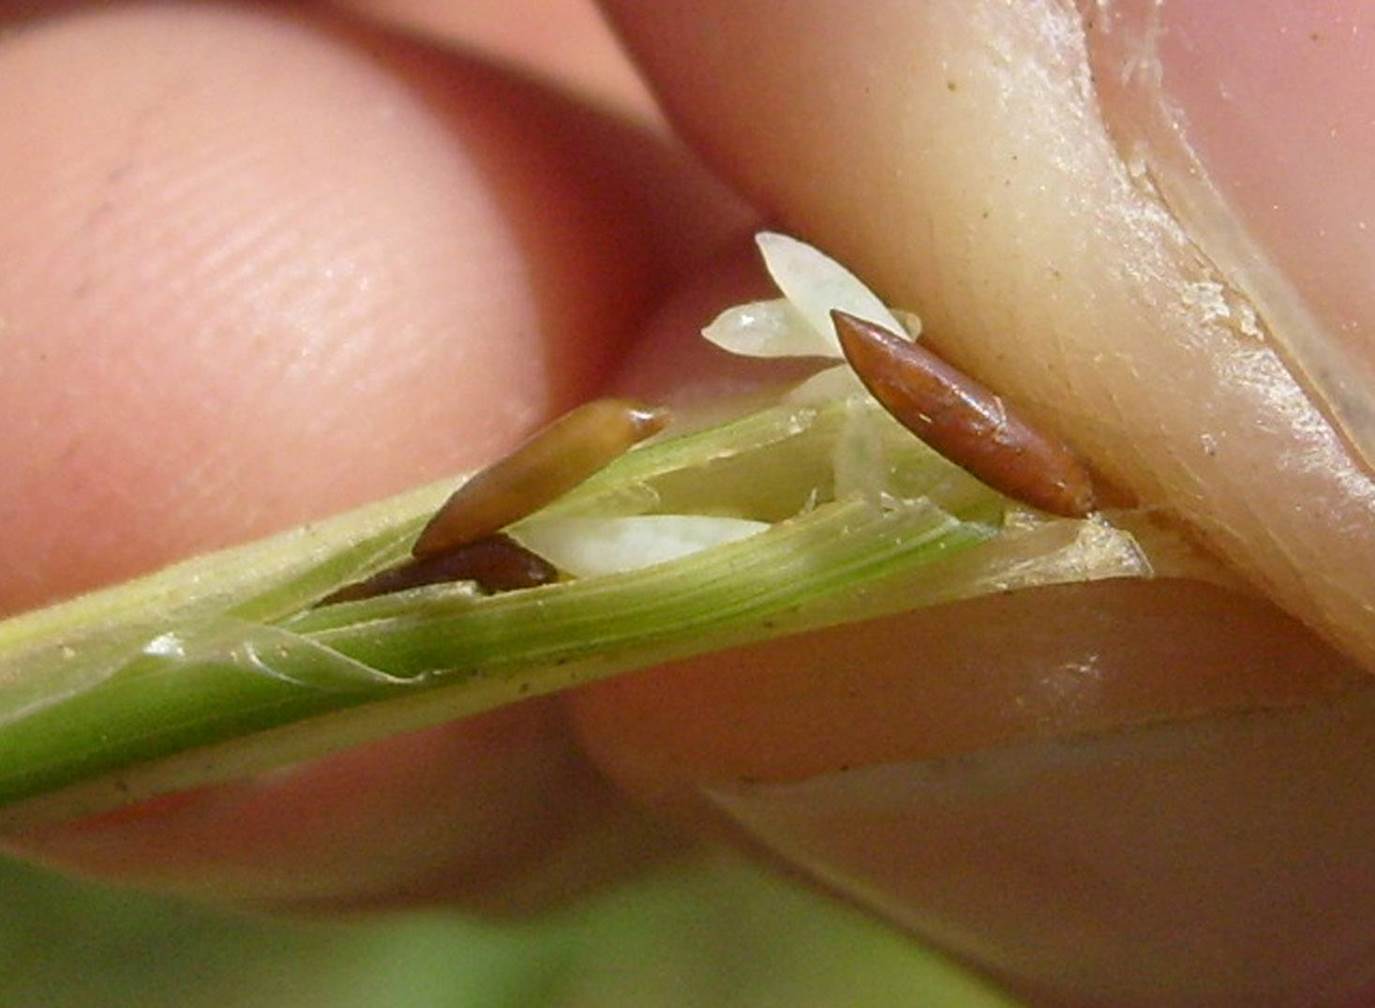 Hessian fly pupae and larvae in wheat crown. Details in text following the image.